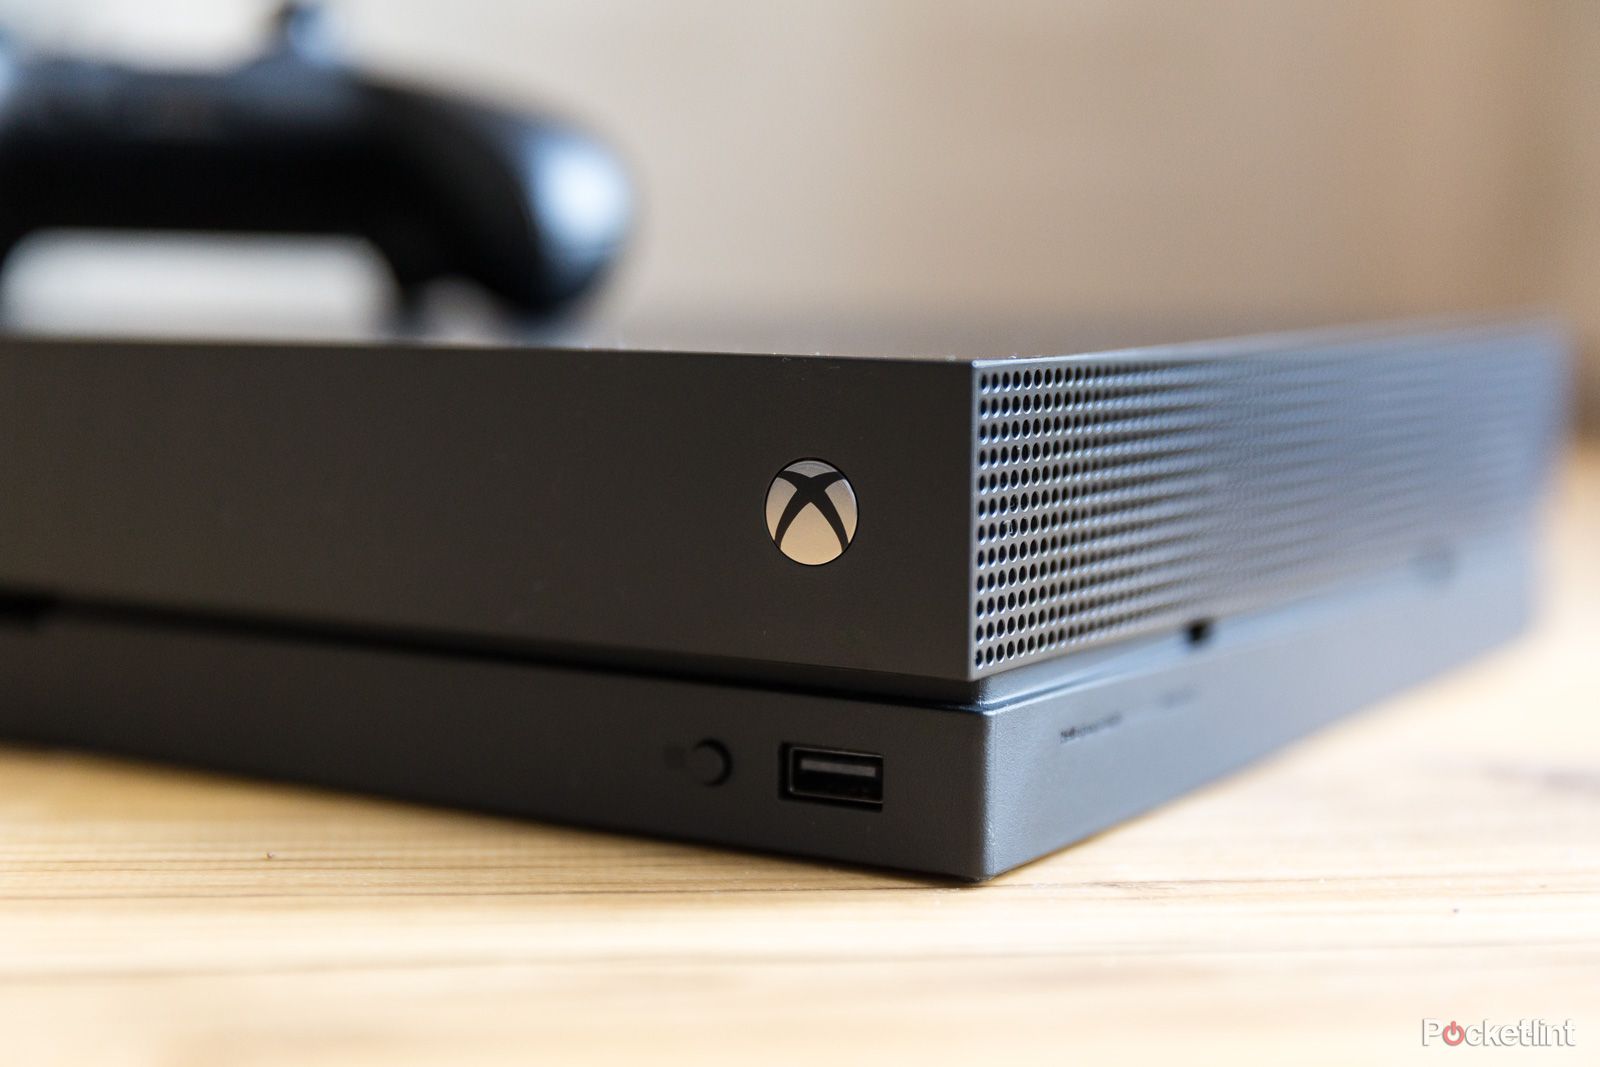 You can now stream PC games to an Xbox One and use a controller to play image 1